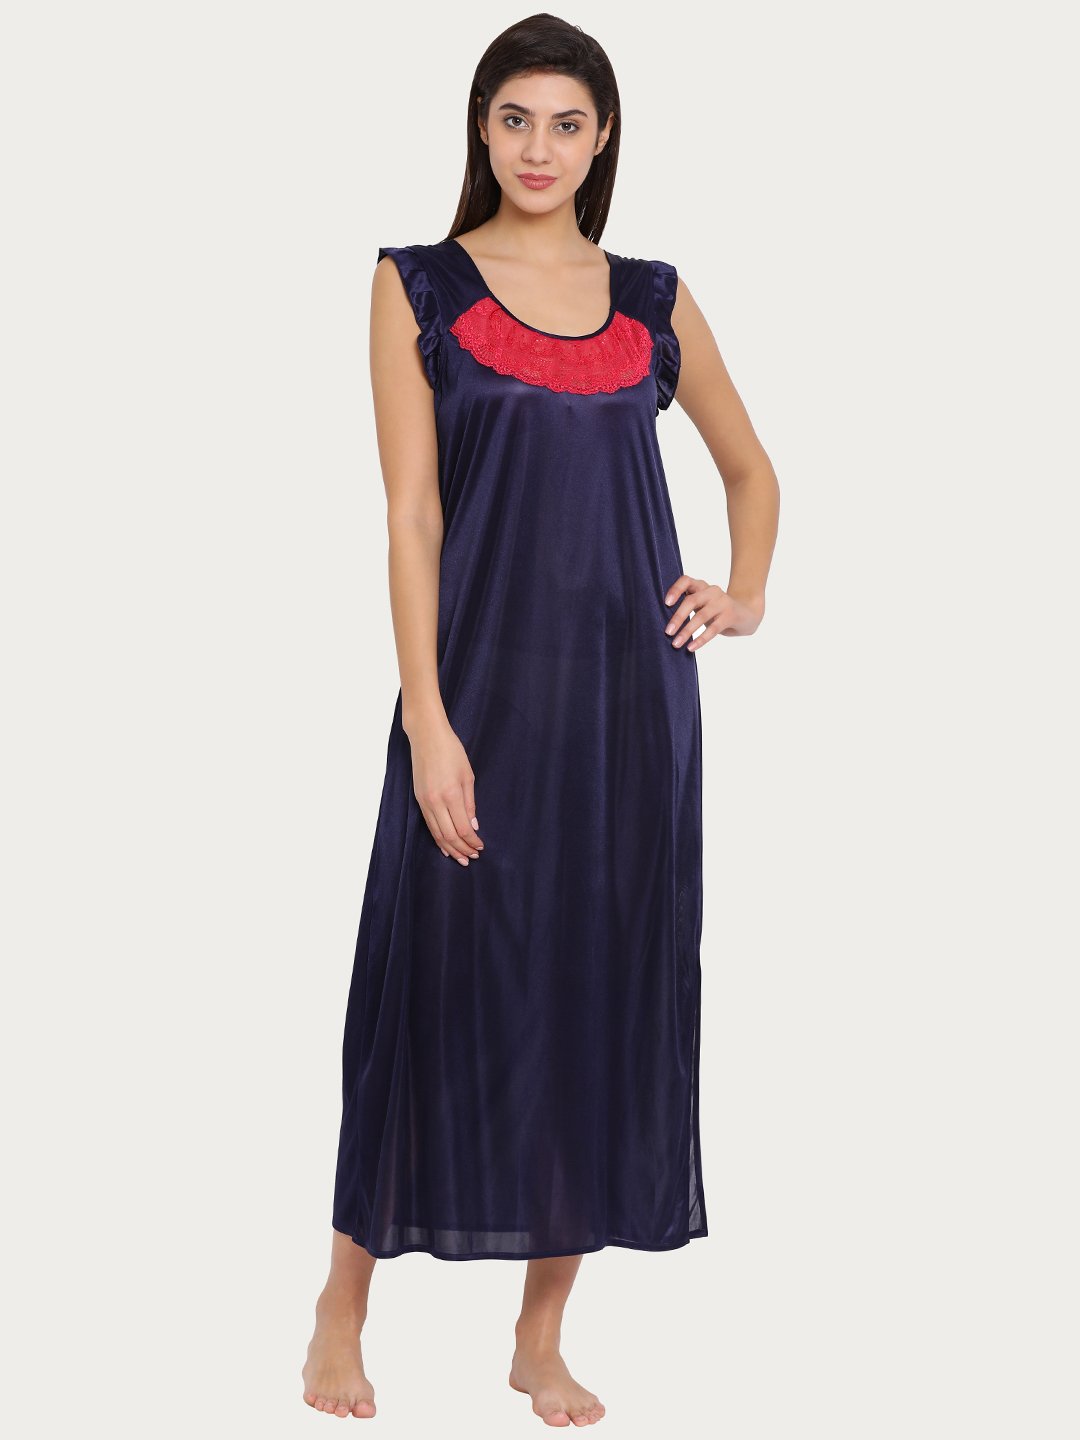 Long Night Dress in Navy with Lace – Satin